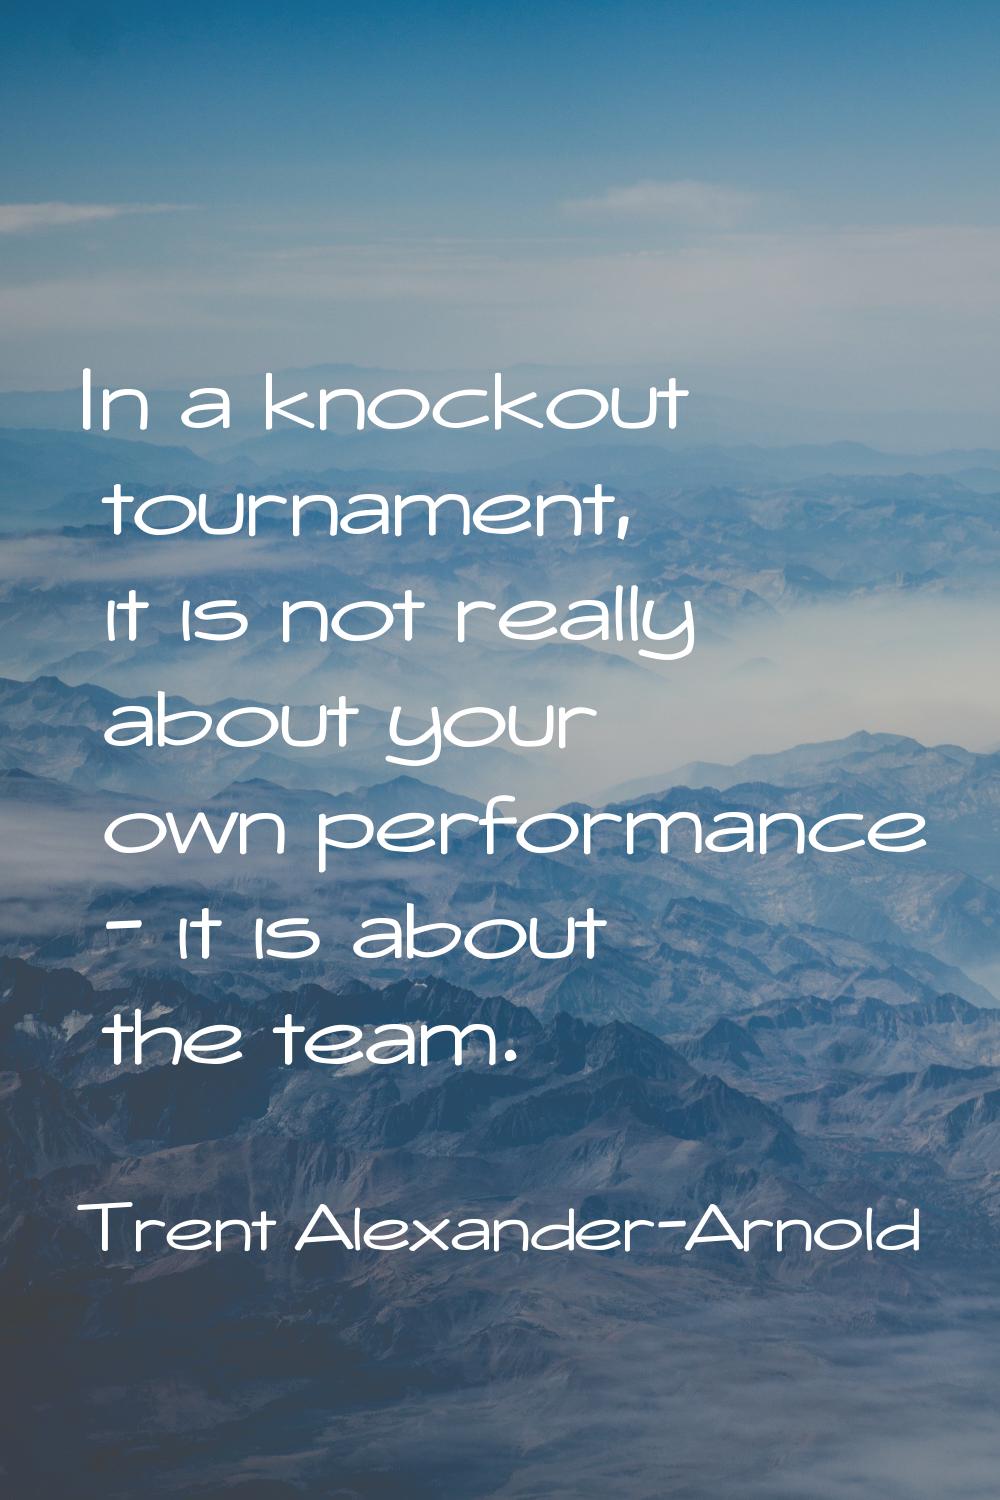 In a knockout tournament, it is not really about your own performance - it is about the team.